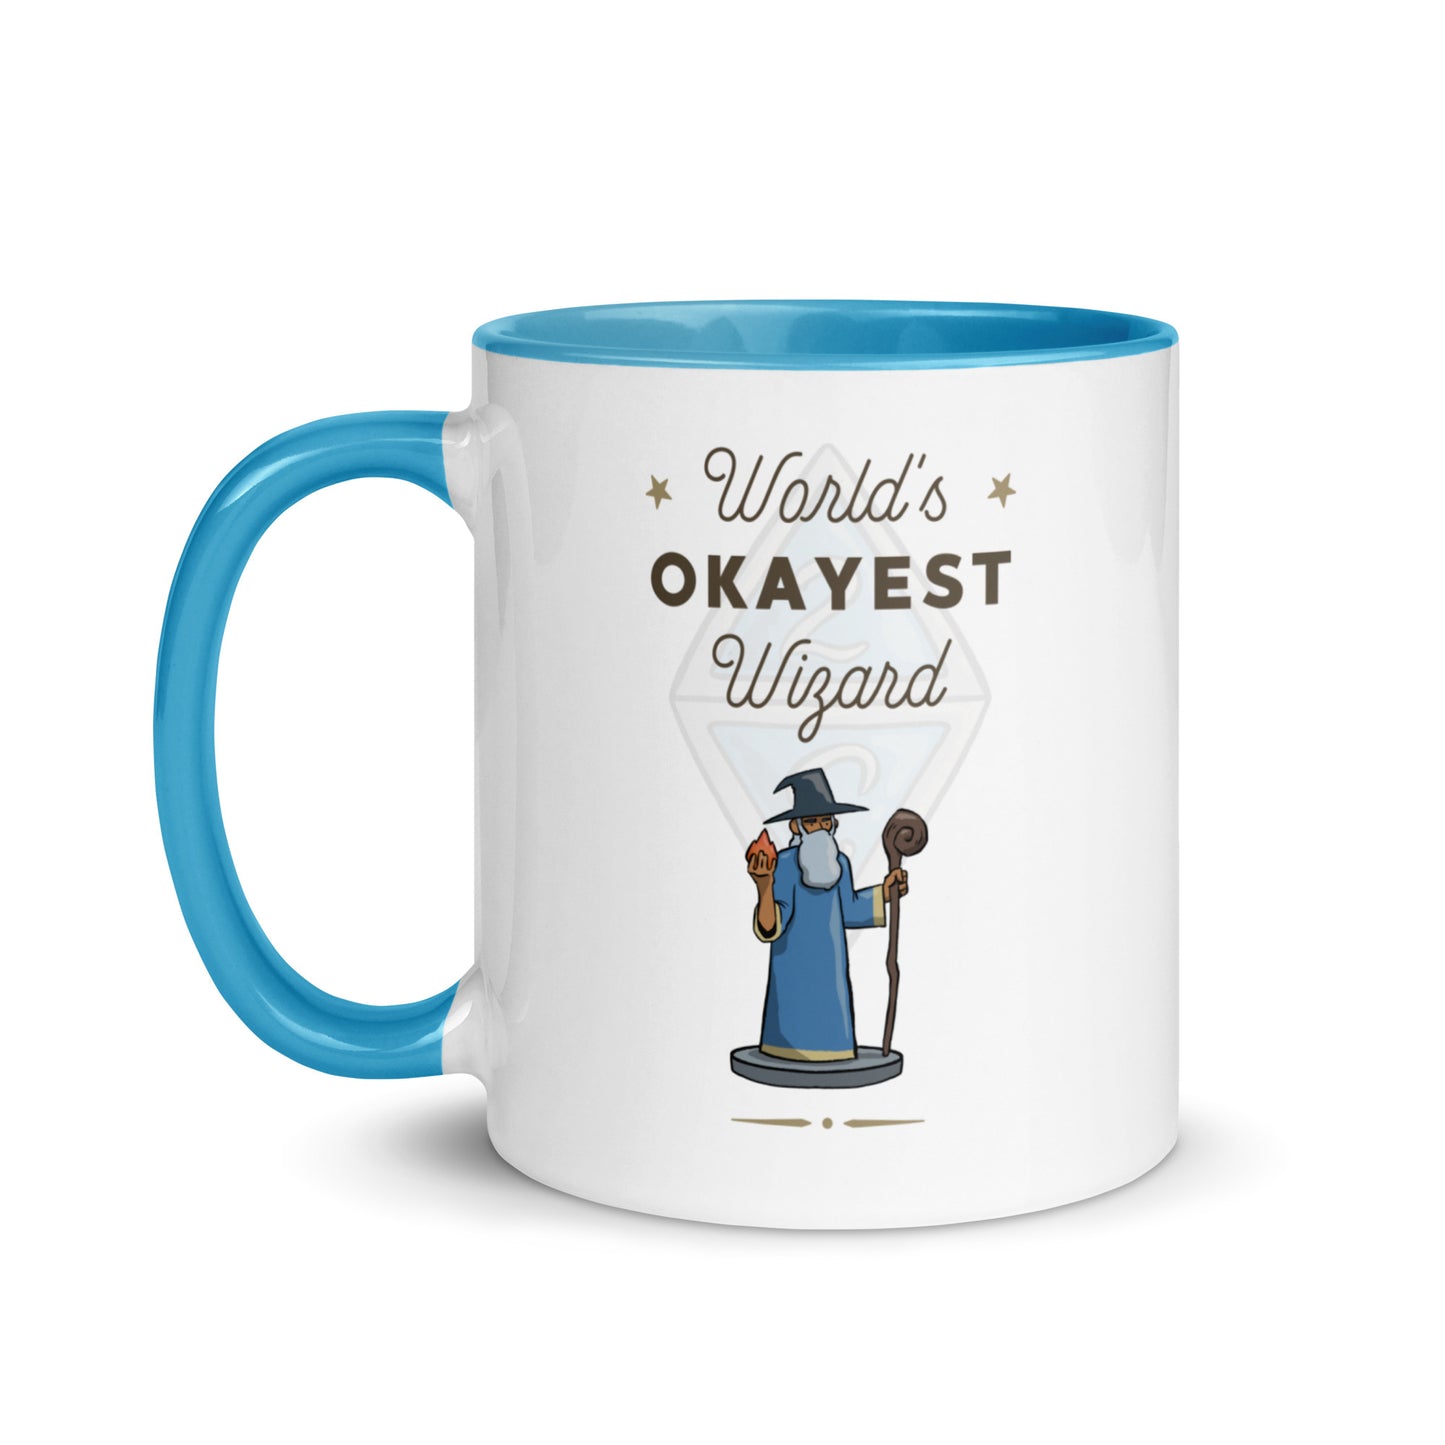 World's Okayest Wizard Mug With Color Inside